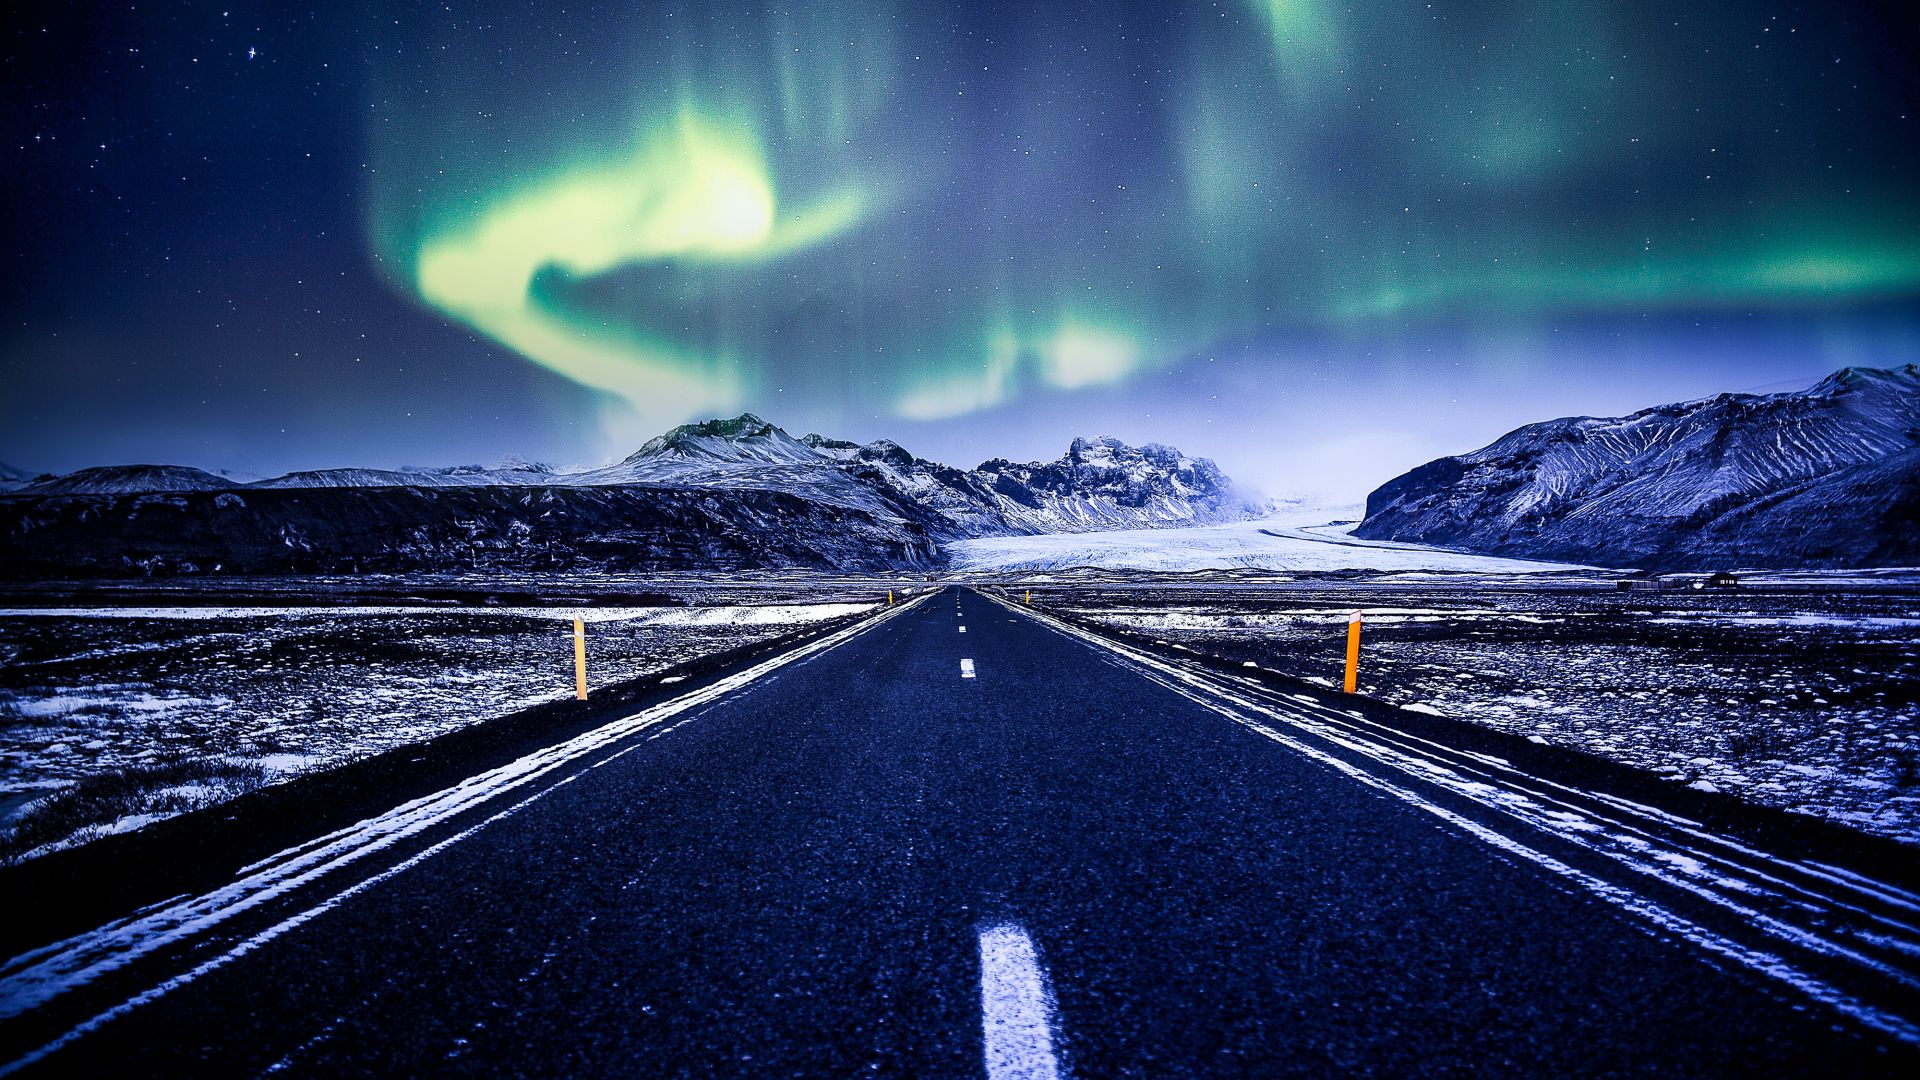 Aurora borealis, northern lights, highway, road, winter wallpaper, HD image, picture, background, b20d35